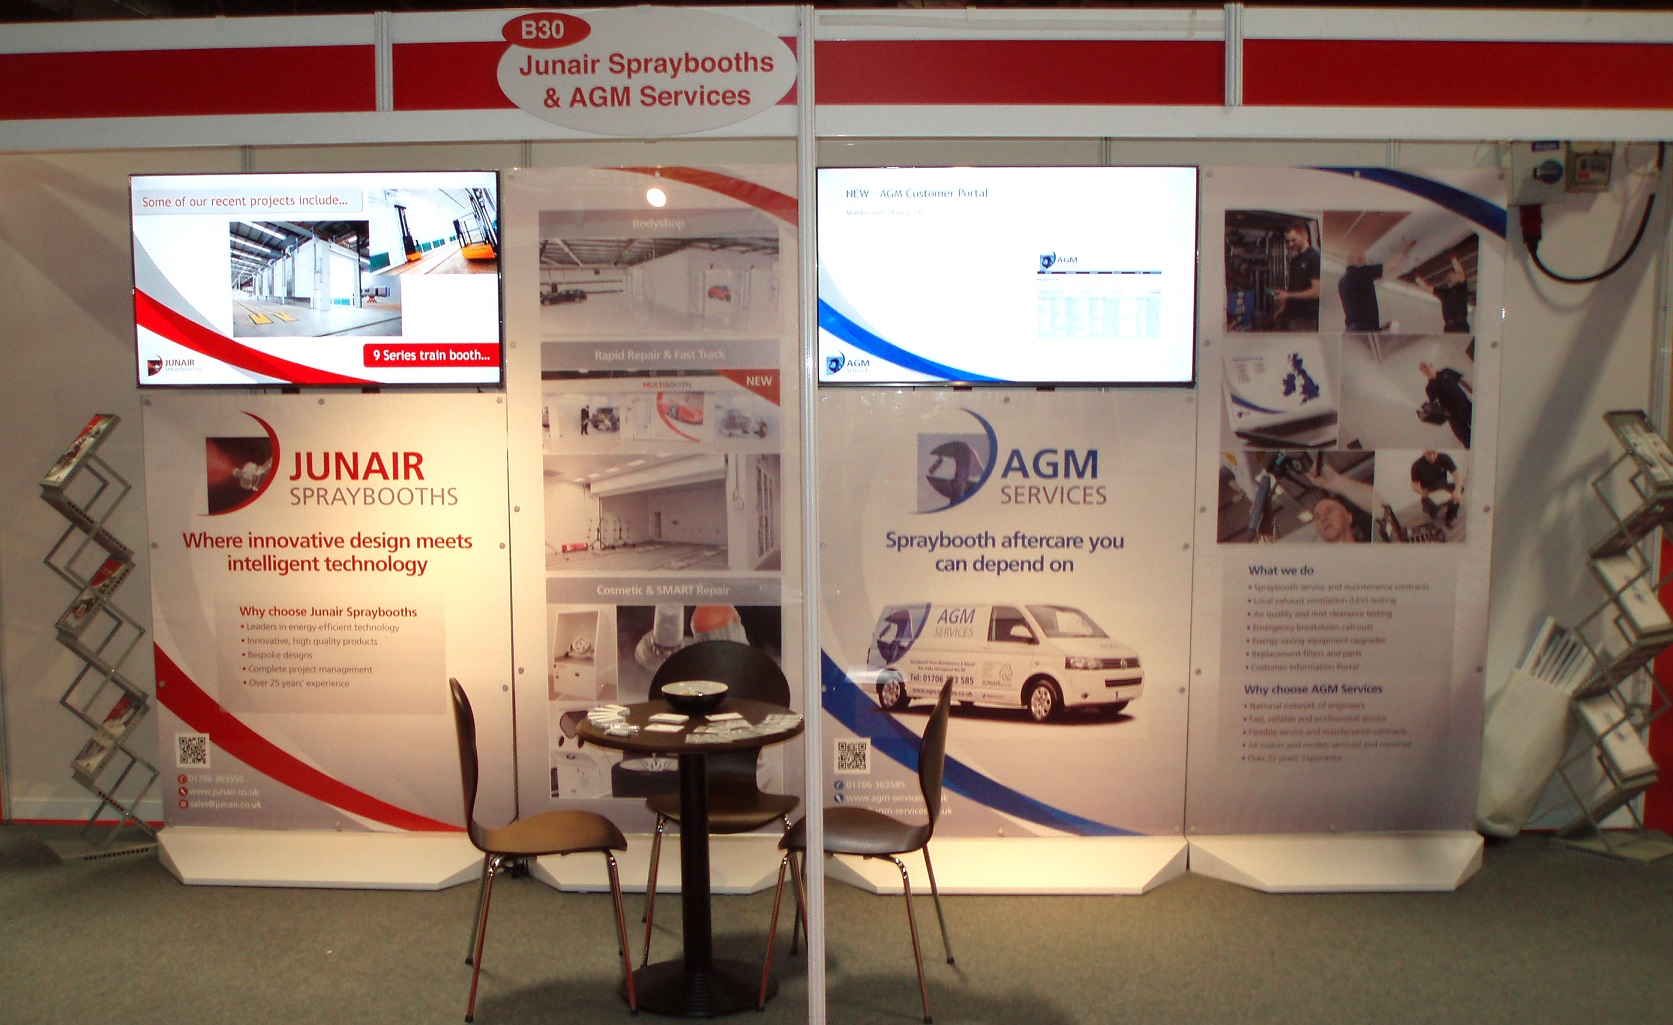 AGM Services at the Advanced Engineering Show